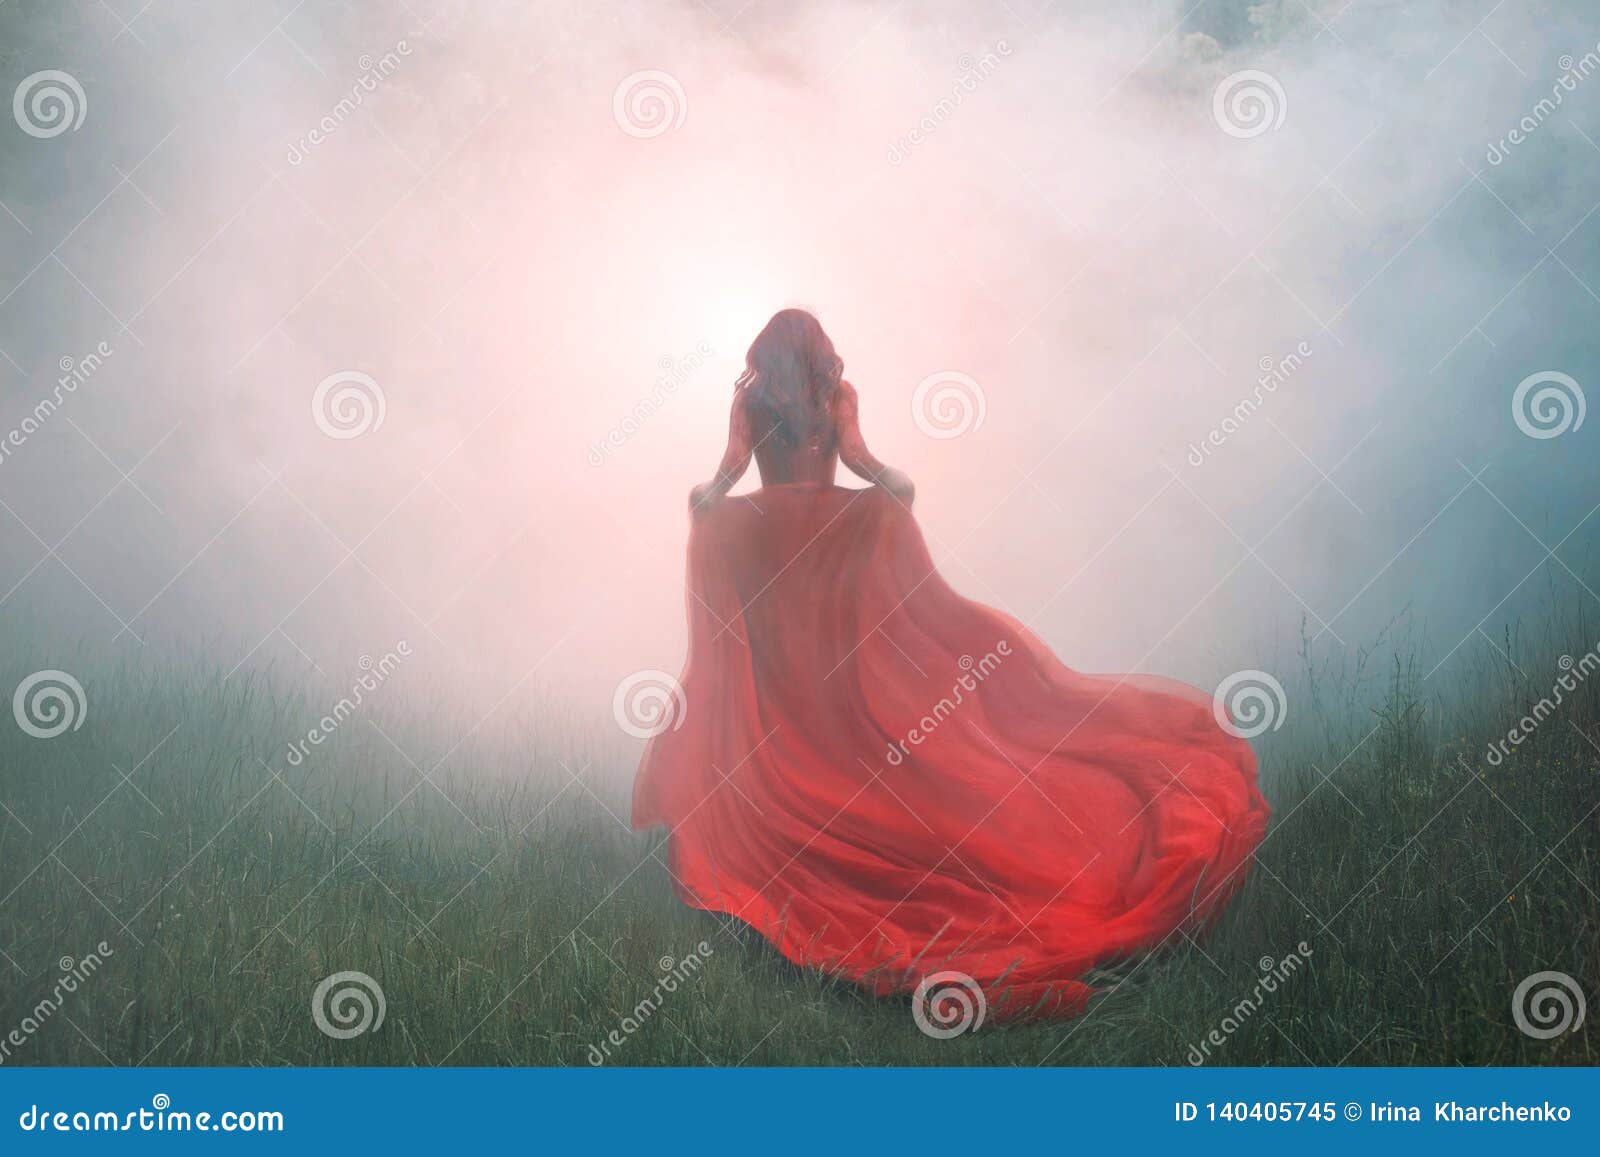 gorgeous amazing wonderful scarlet red dress with a long flying waving train, a mysterious girl with red curly hair runs